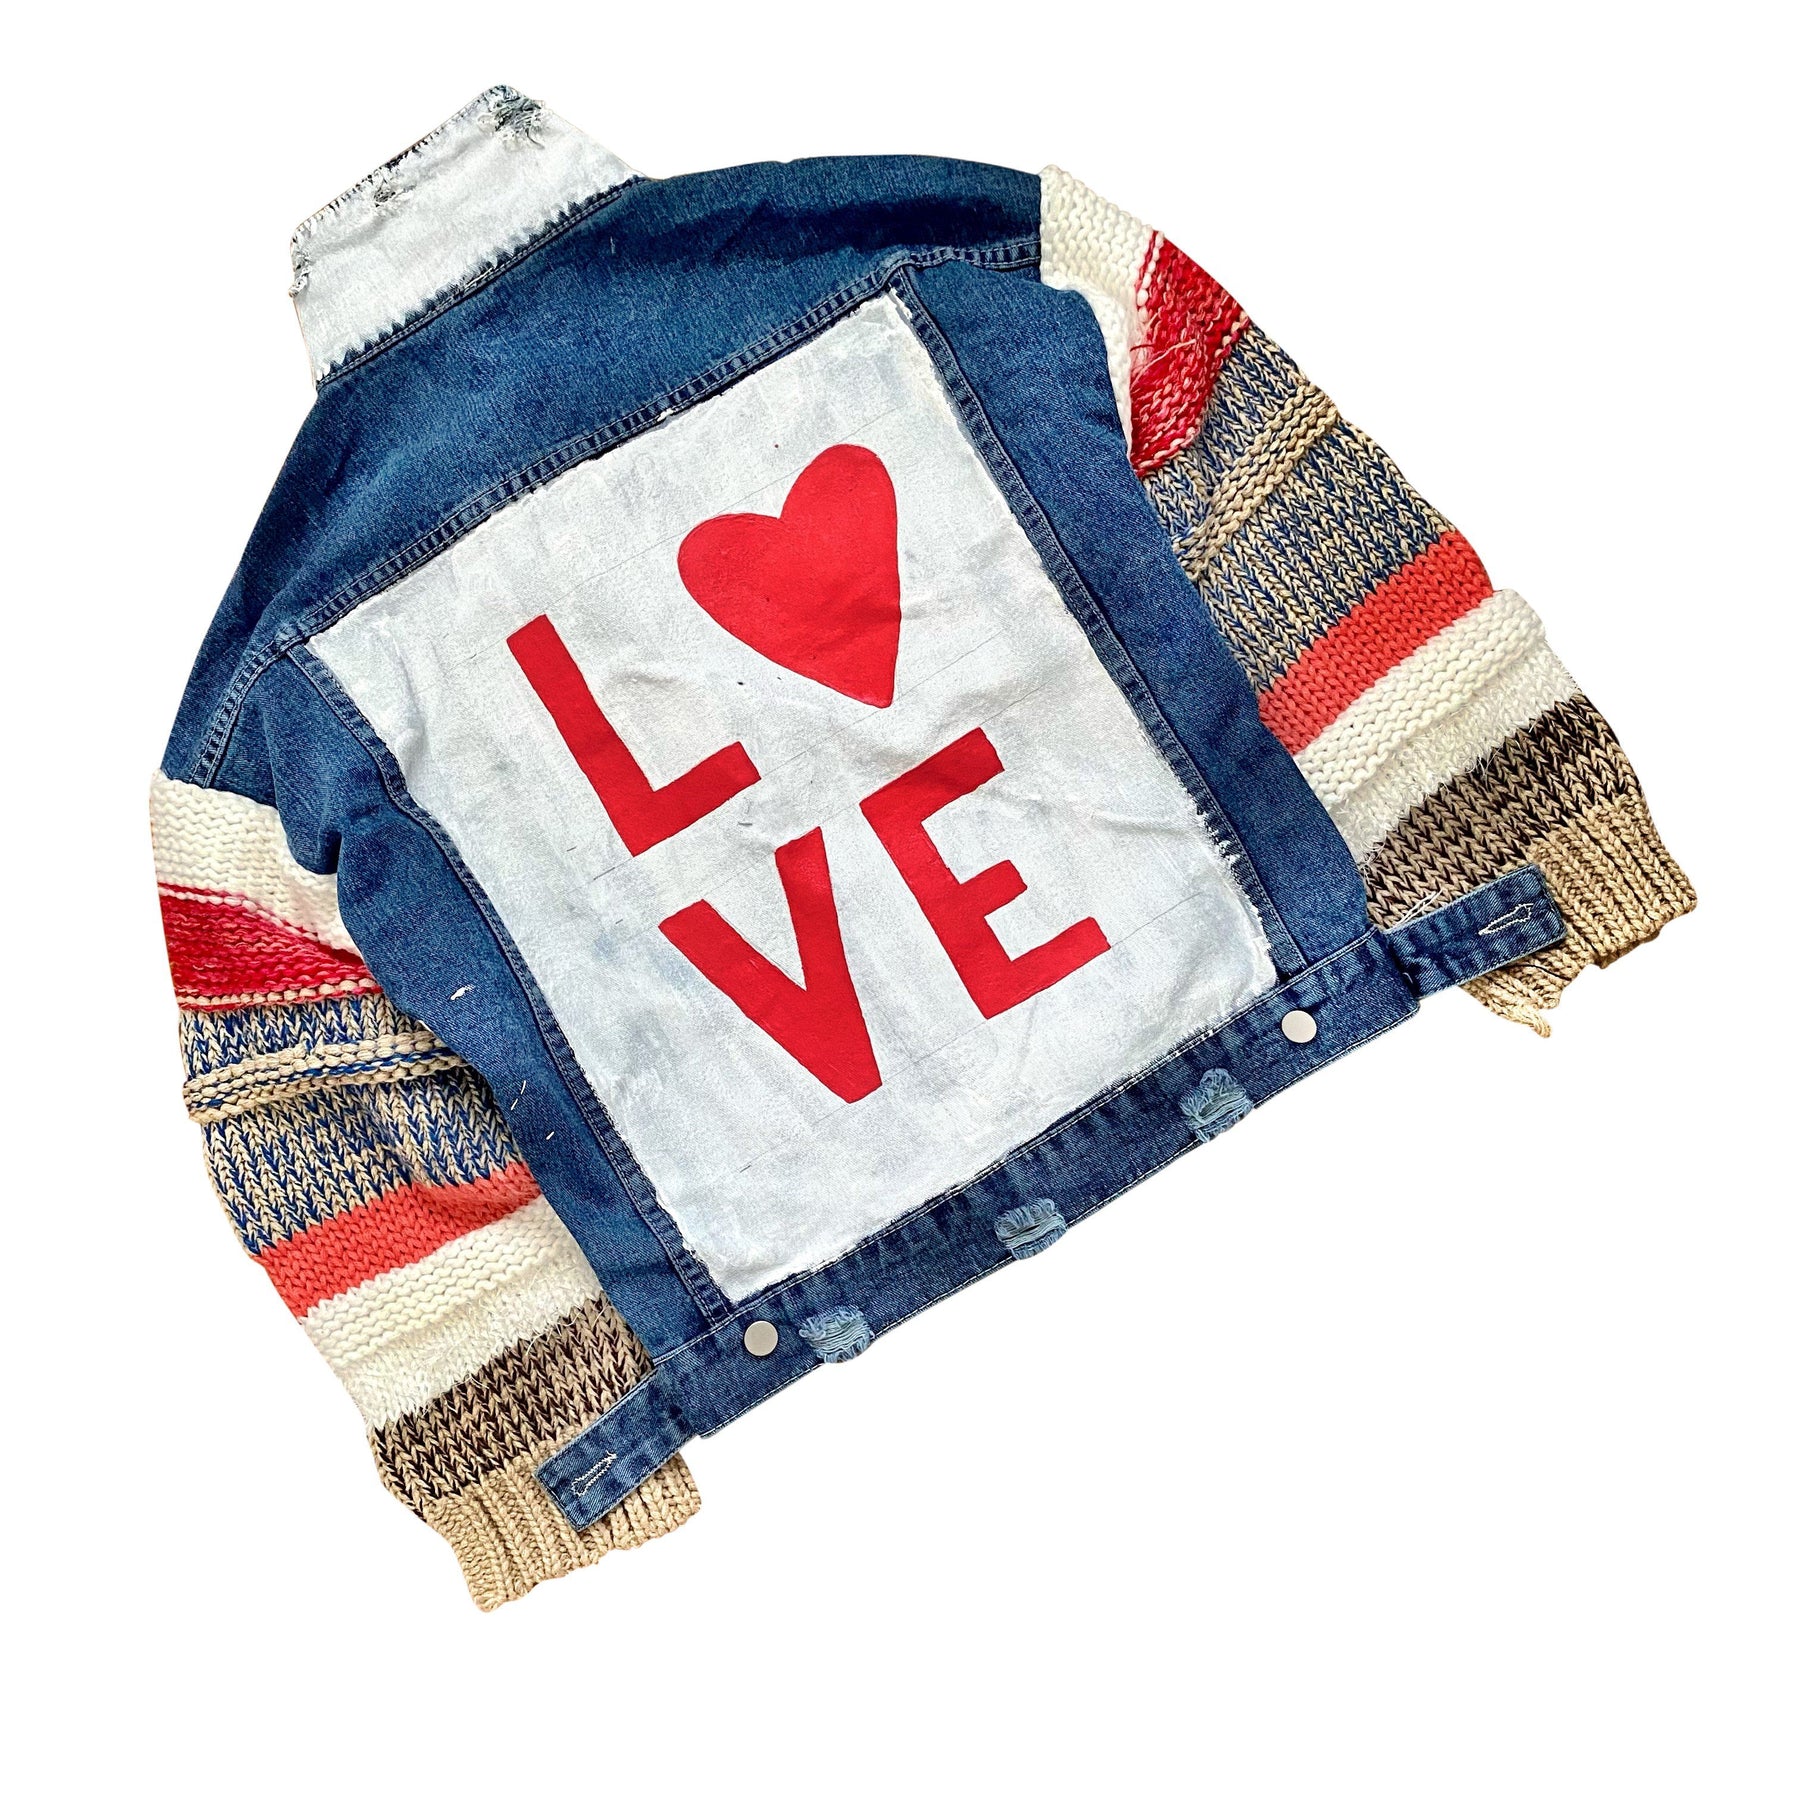 Dark blue denim jacket with  super comfortable knit sleeves. White base on back, with LOVE painted over in red, with a heart Signed @wrenandglory.